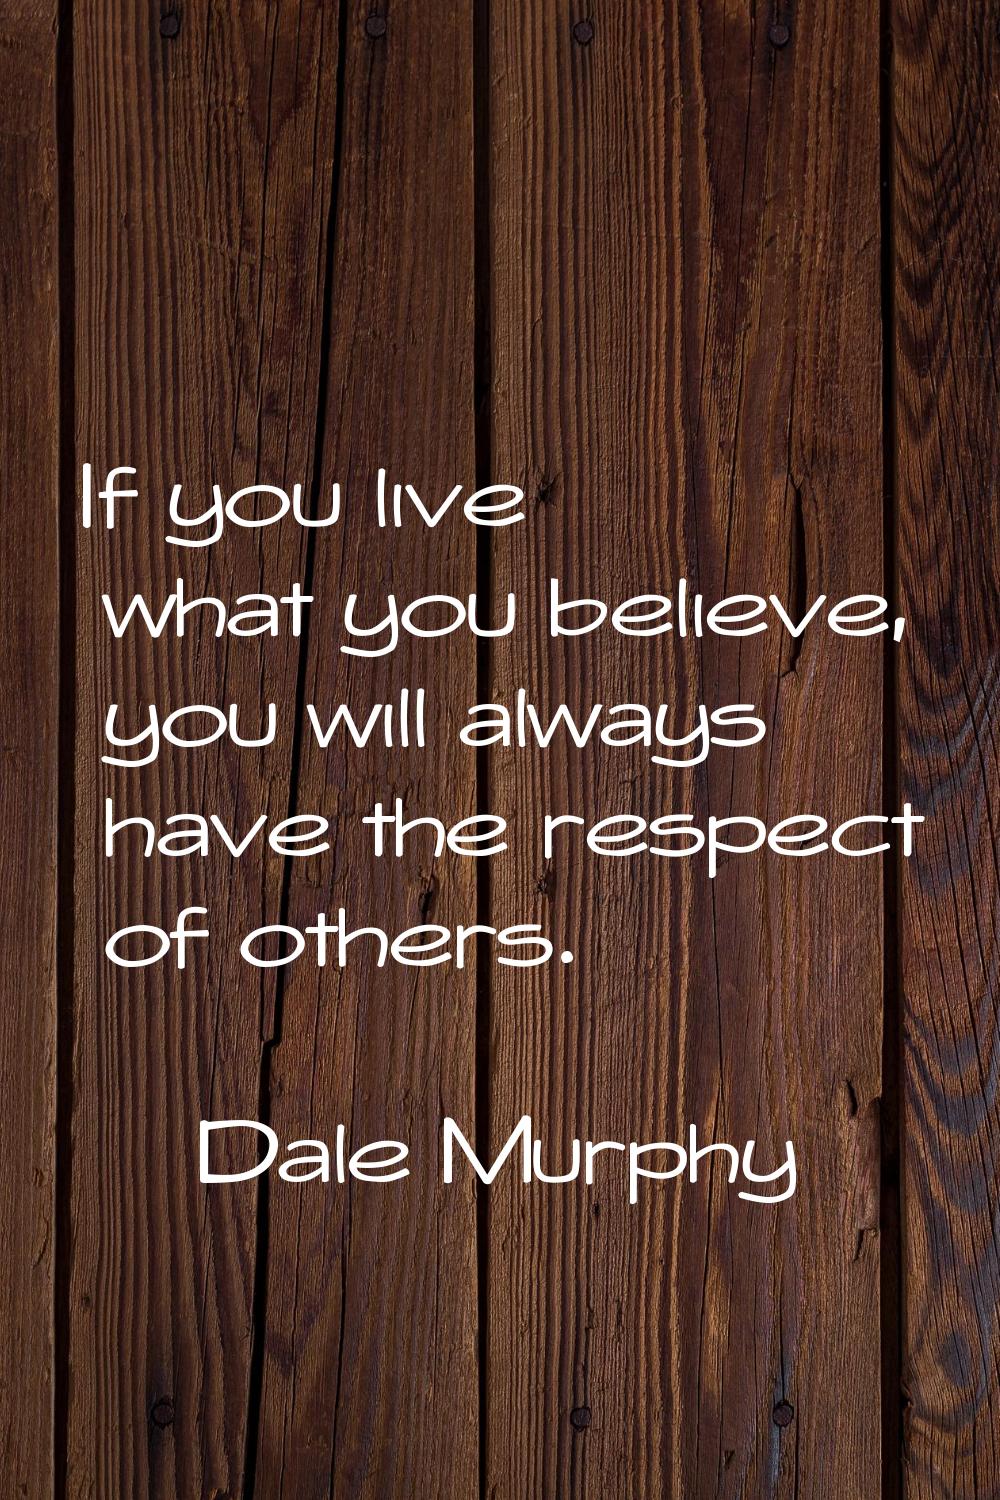 If you live what you believe, you will always have the respect of others.